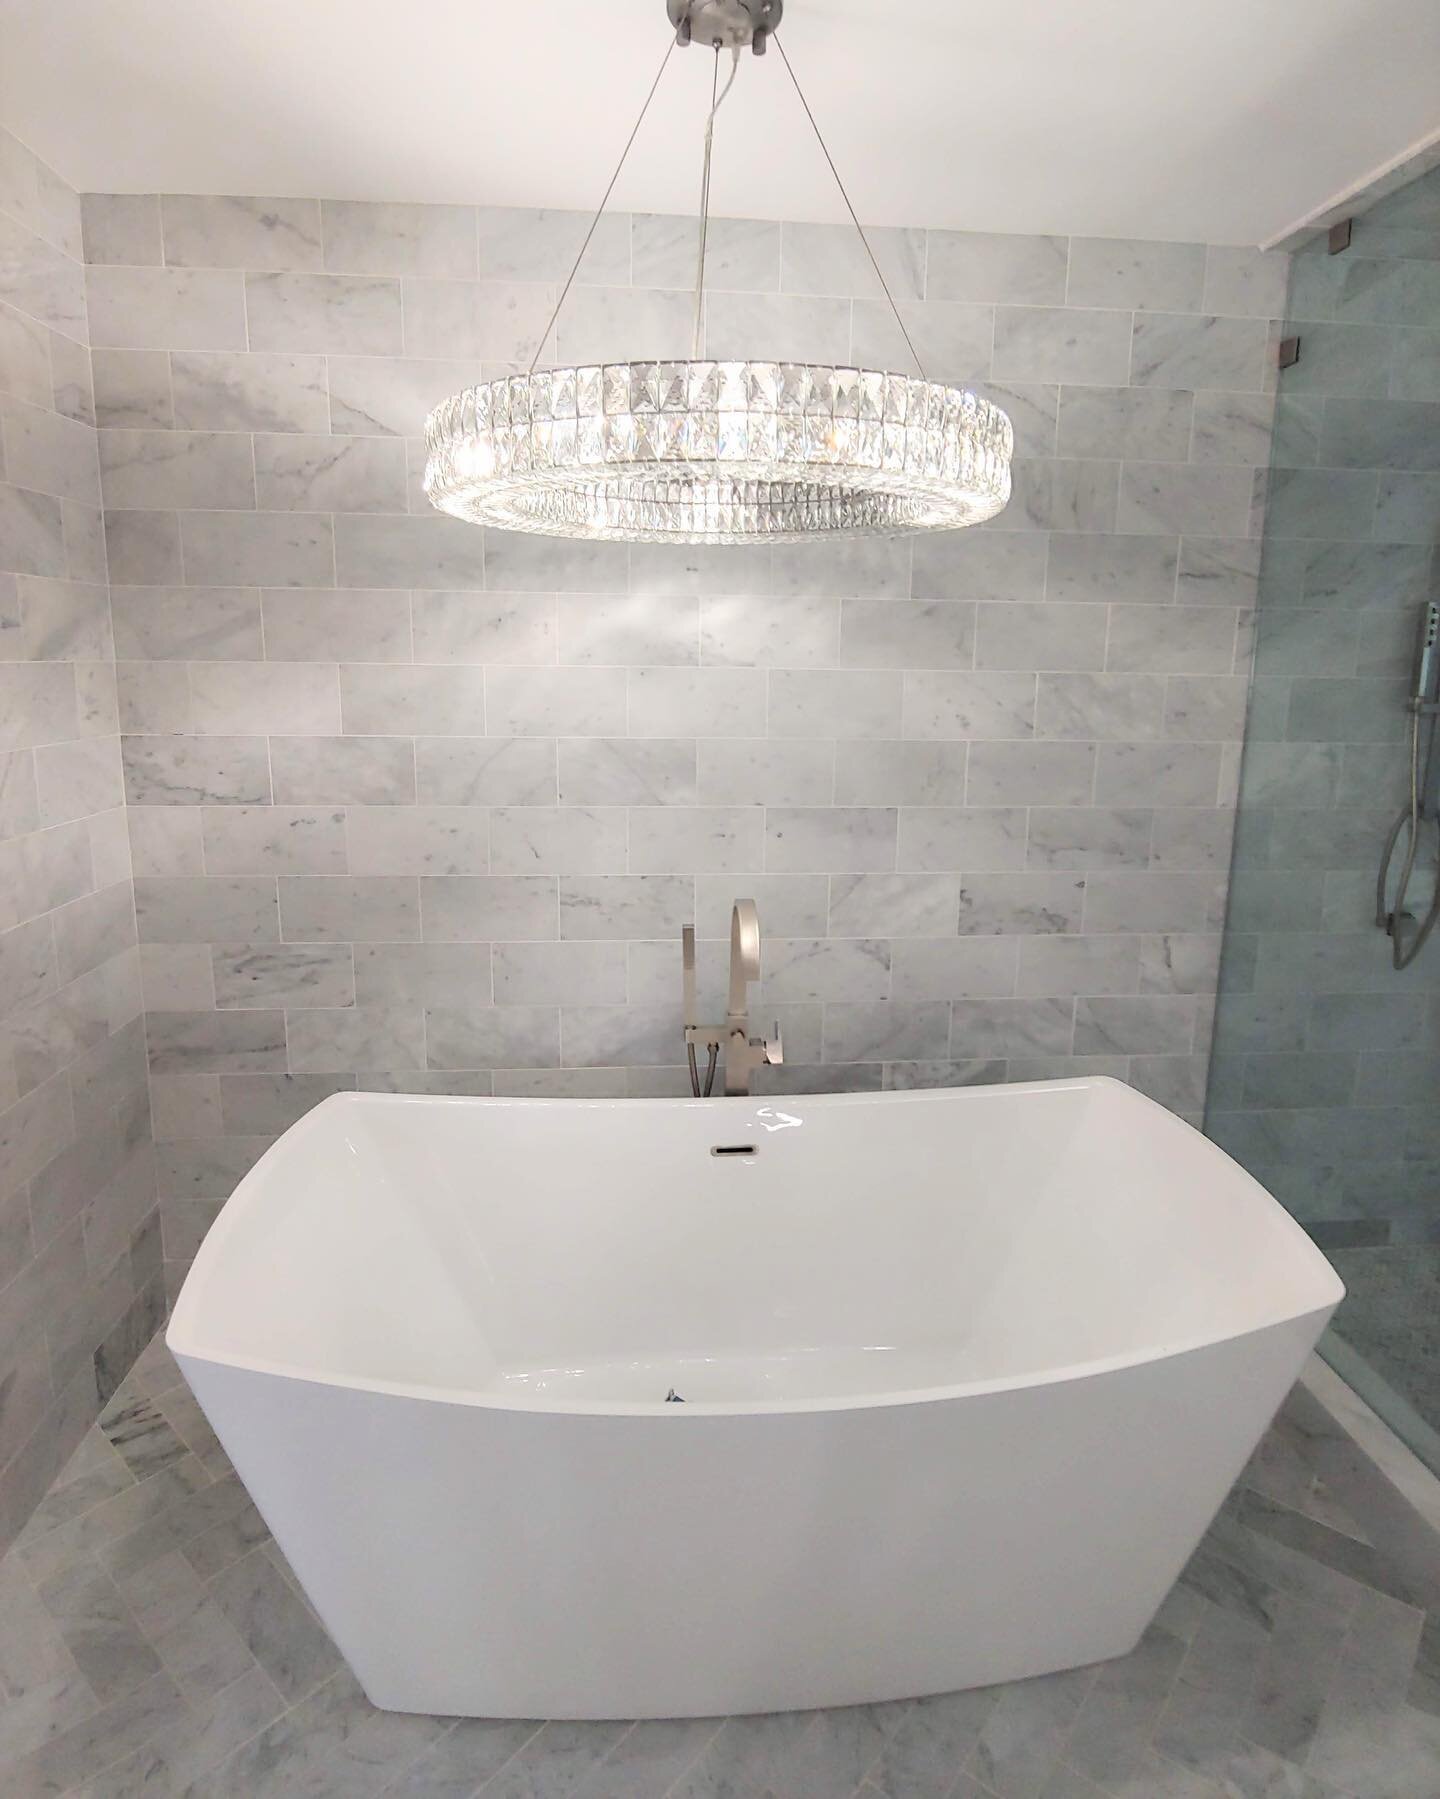 What do you love more? Comment below ⬇️ 

🌟Glamorous Chandelier?

🌟Carrara Marble wall tile?

🌟That huge tub you get to sink into?

#interiordesign
#socalinteriordesigner
#moderninteriordesign
#retrointeriordesign
#remodelhome
#bathroomremodel
#lo